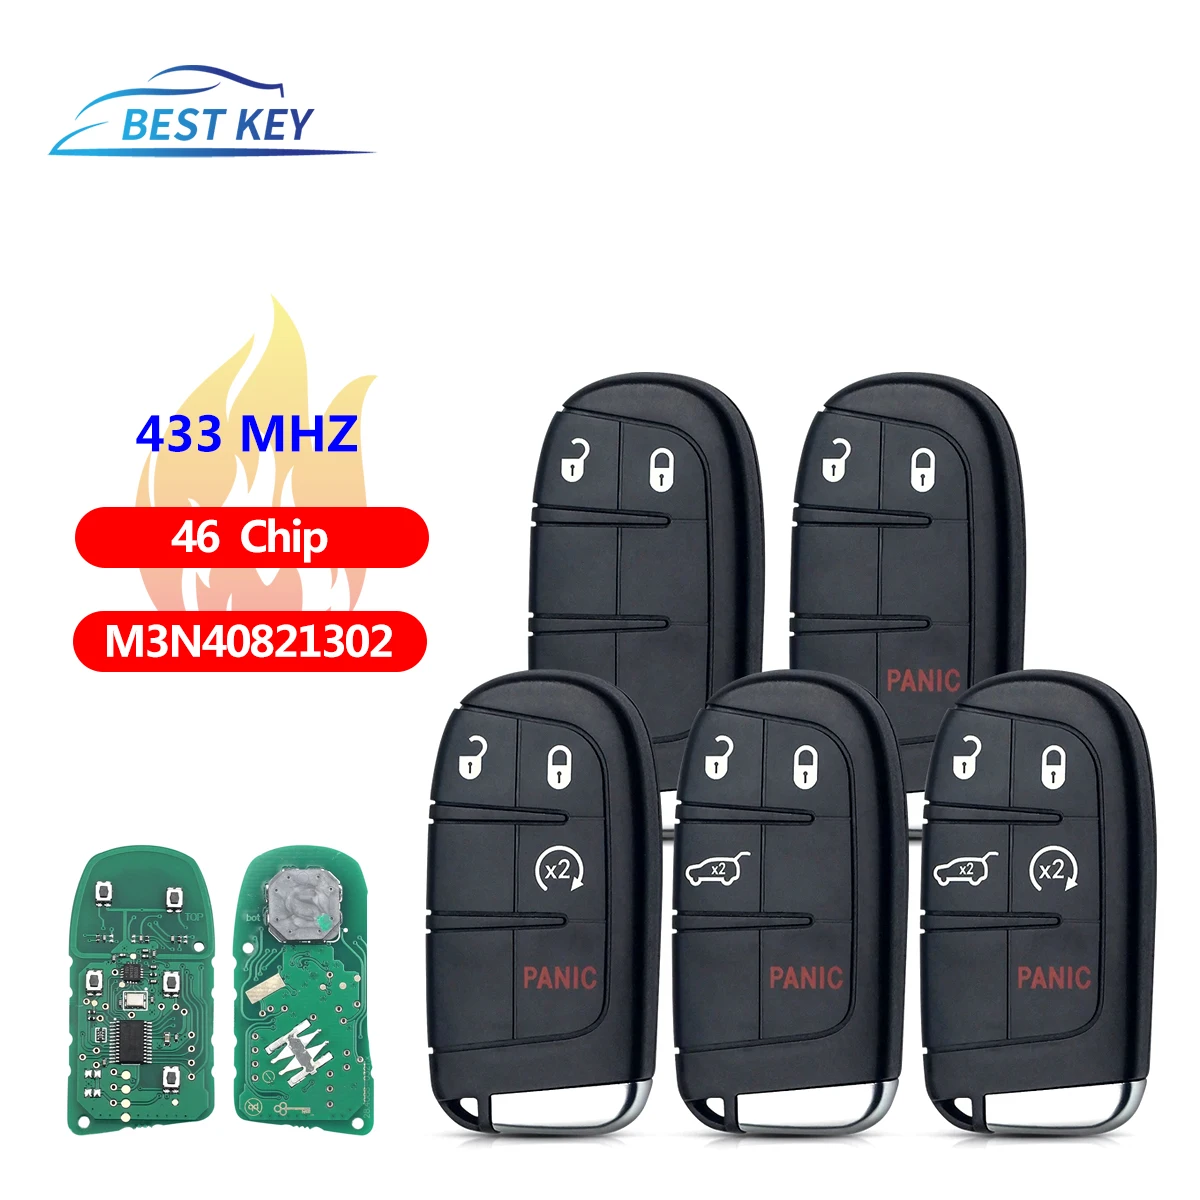 BEST KEY 2/3/4/5 Button Smart Remote Car Key For Jeep Grand Cherokee Dodge Chrysler 2011-2020  M3N40821302 433MHz ID46 pcf7945